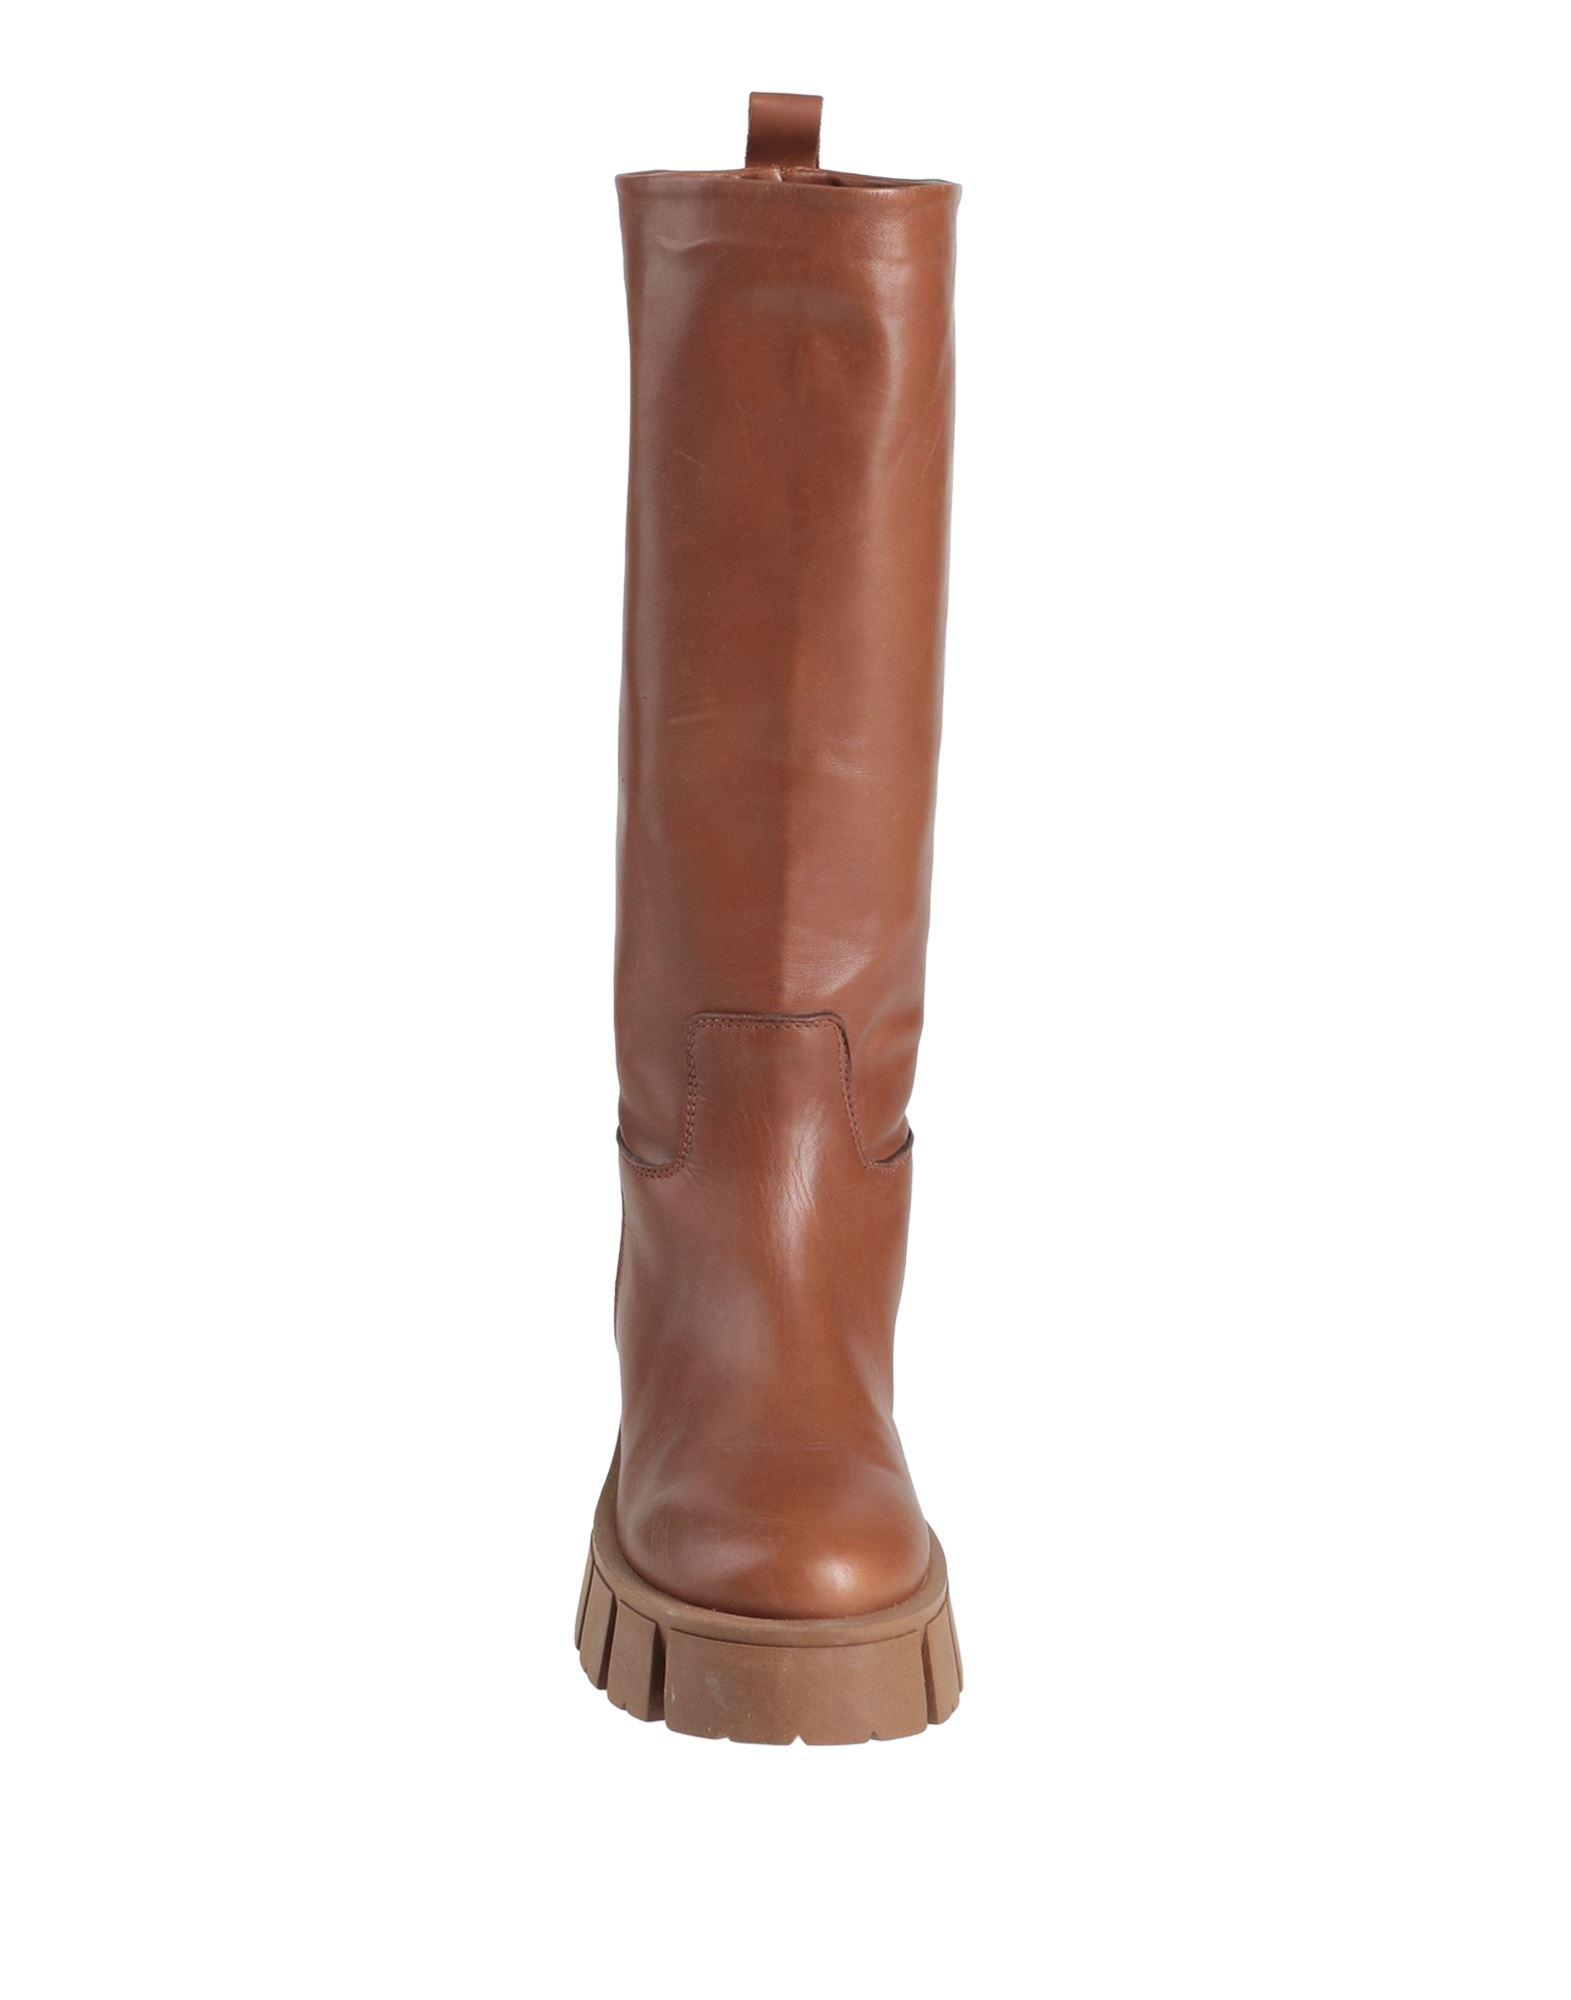 Ovye' By Cristina Lucchi Leather Knee Boots in Tan (Natural) | Lyst